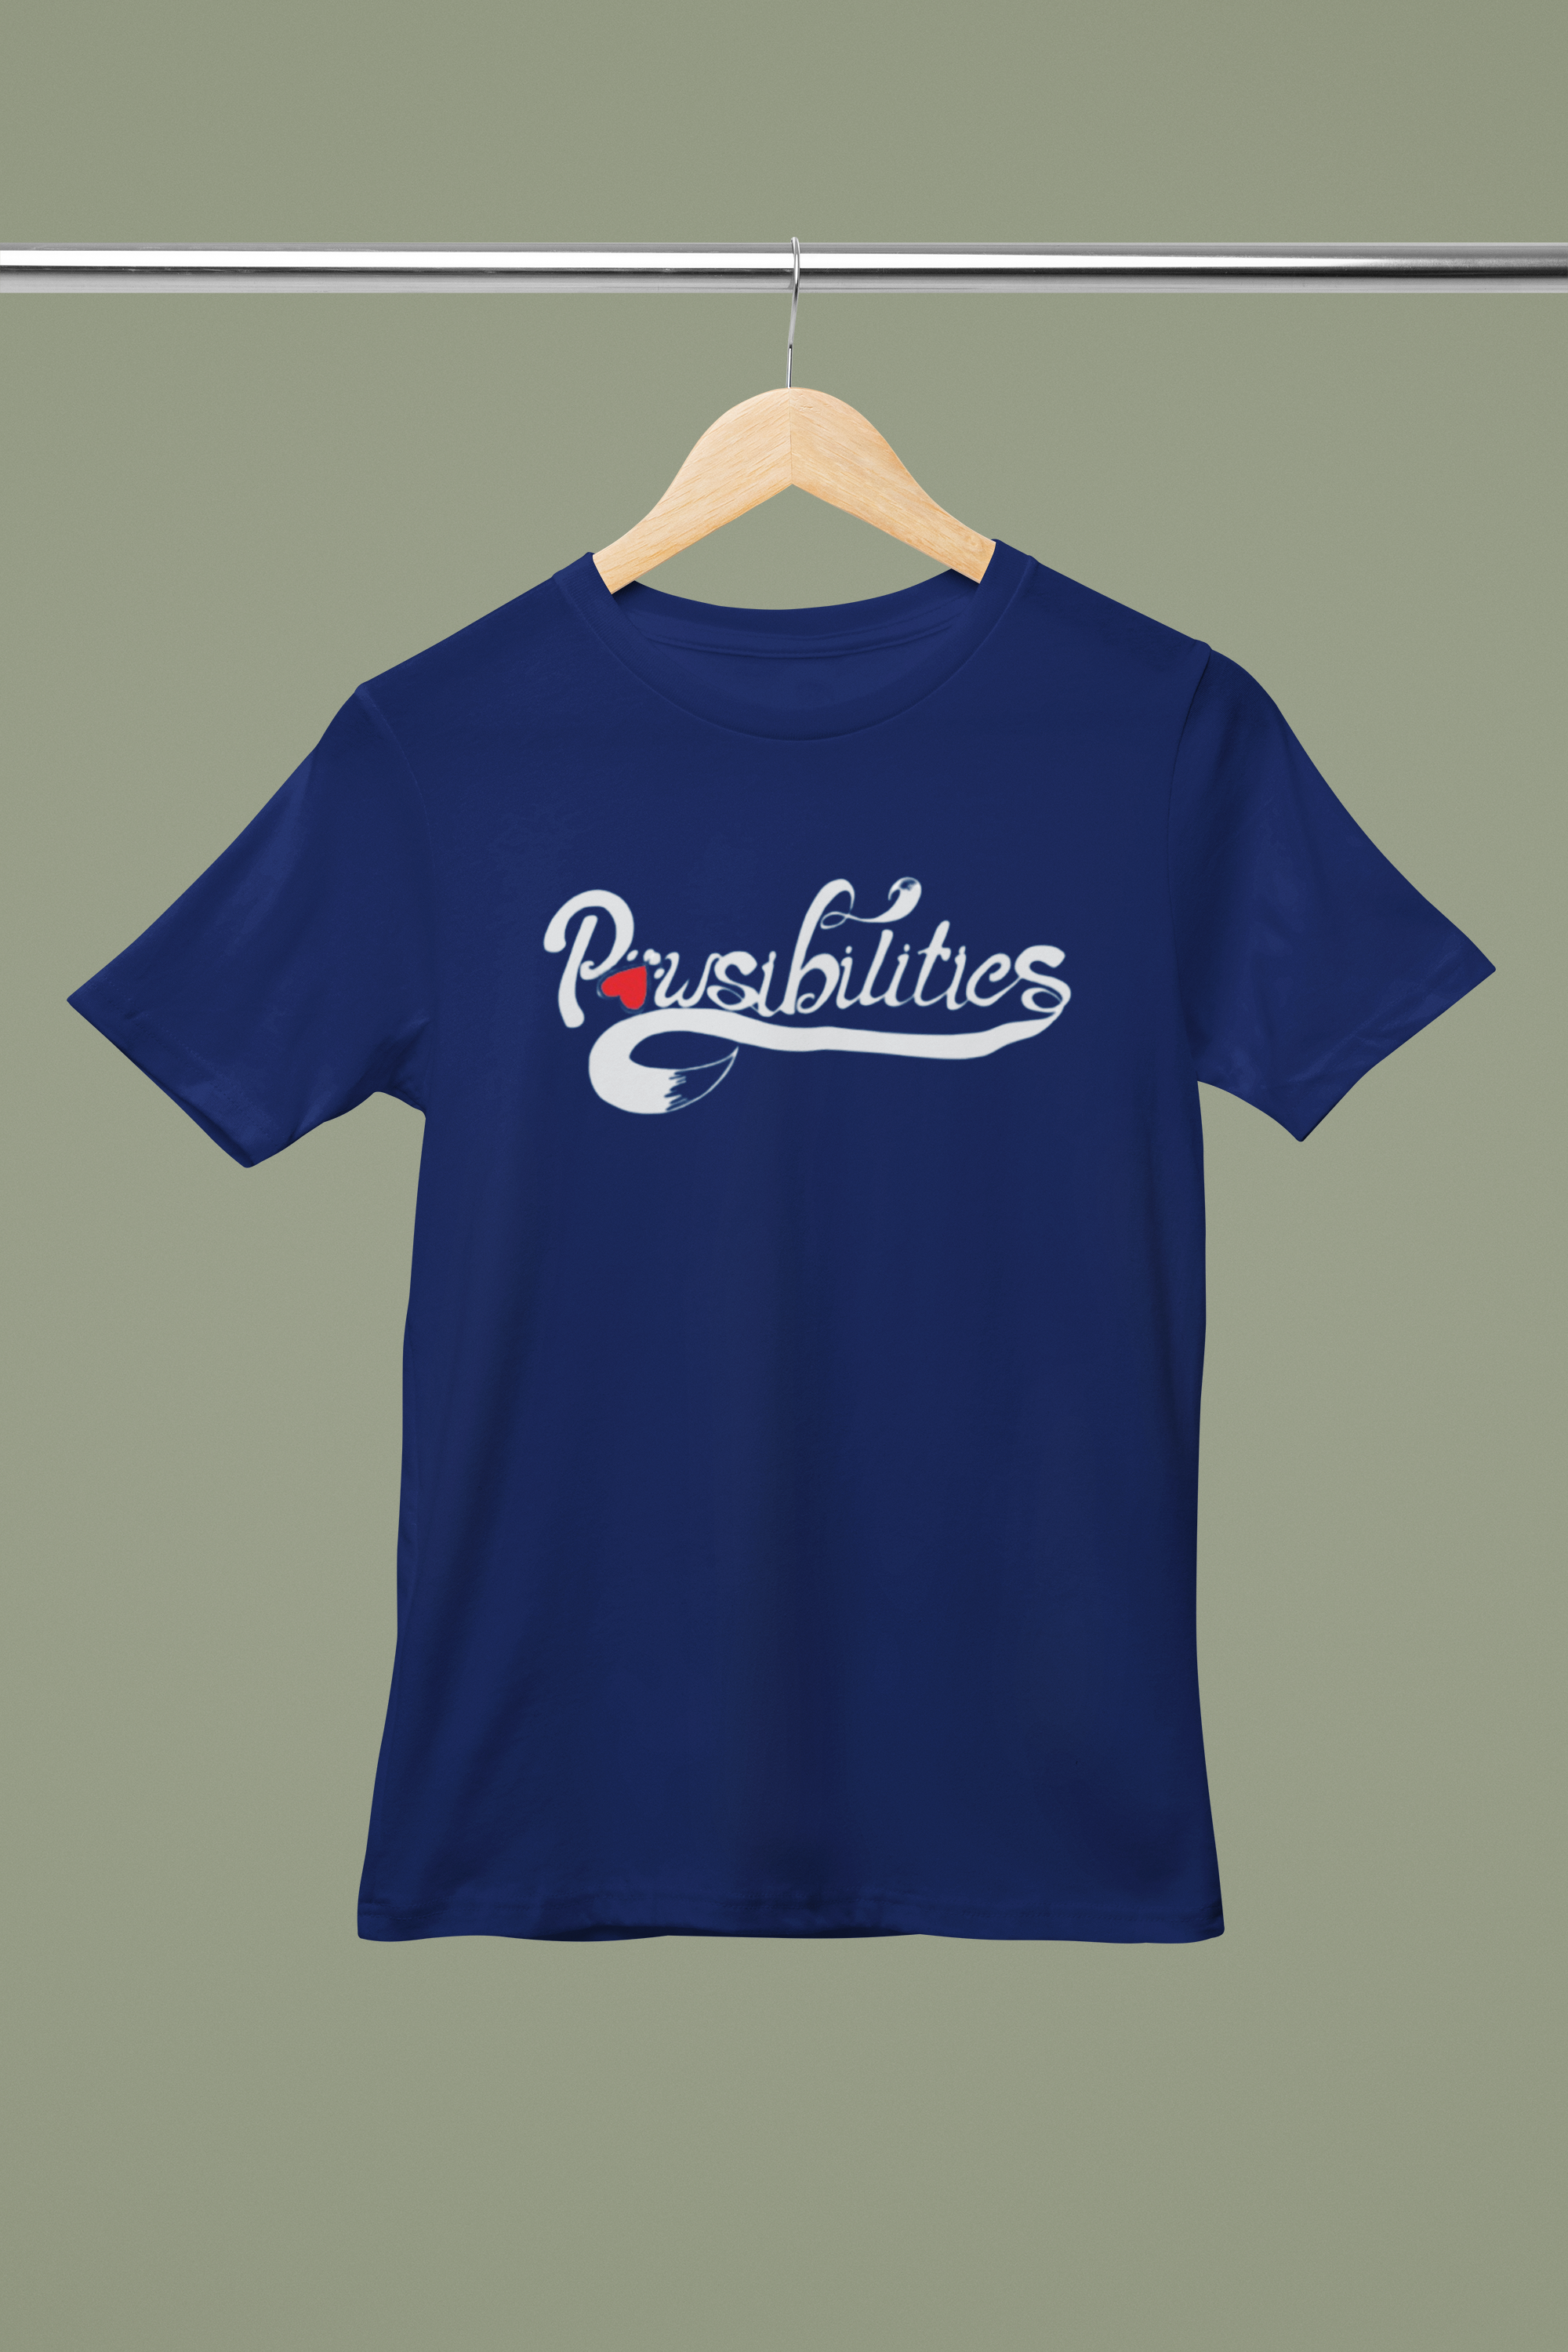 Pawsibilities Unisex Tee (available in several colors)